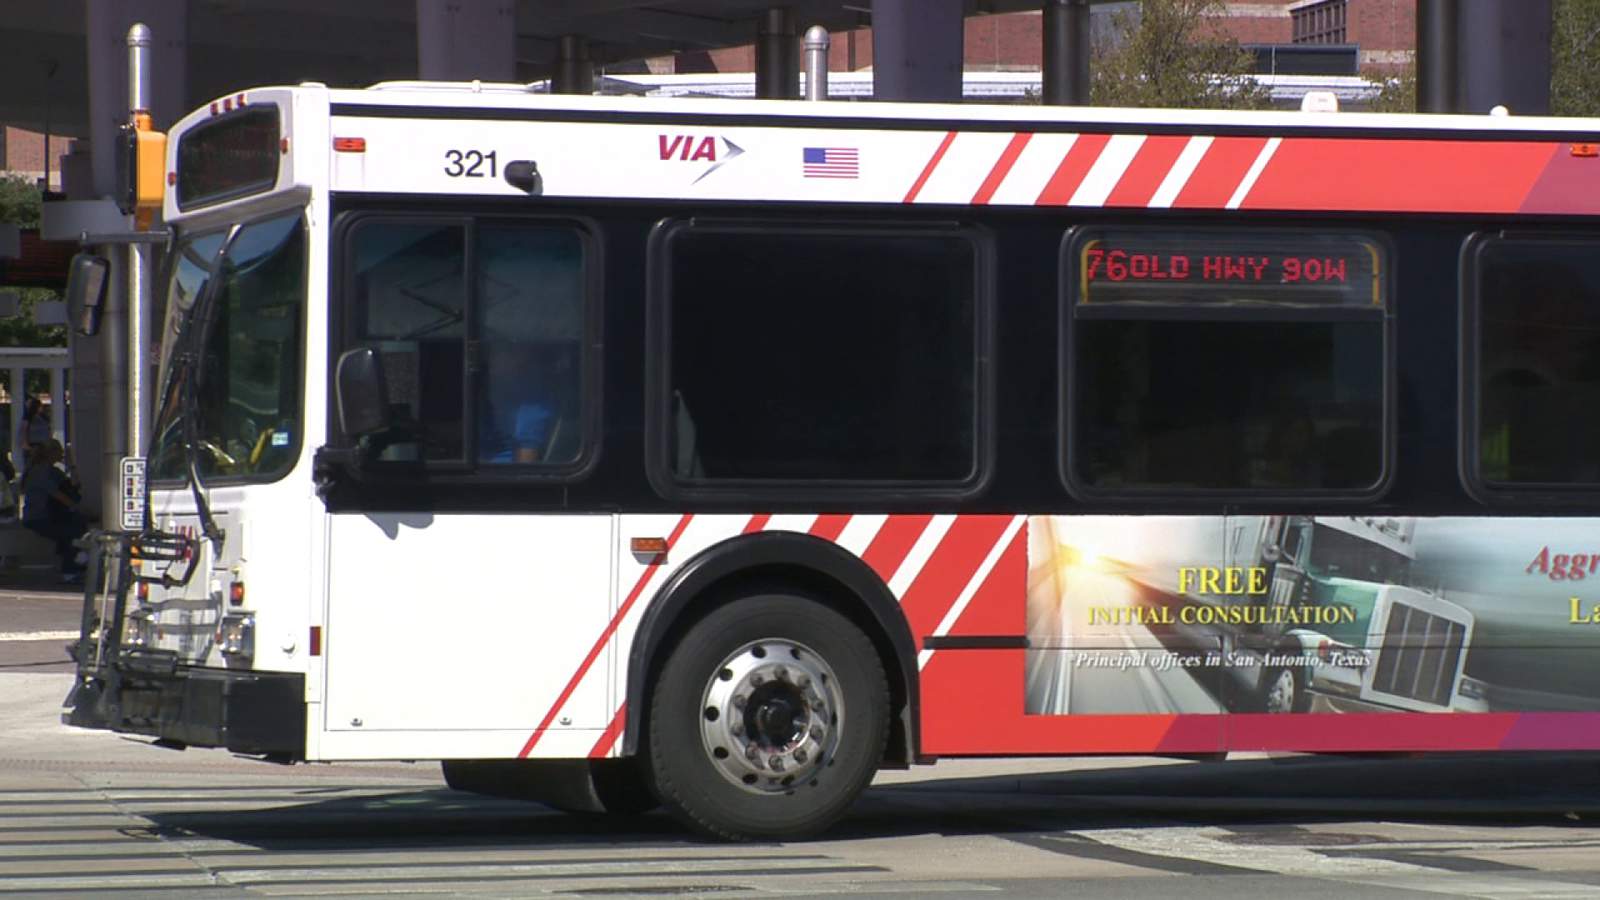 VIA offers free bus and van rides on Primary Election Day